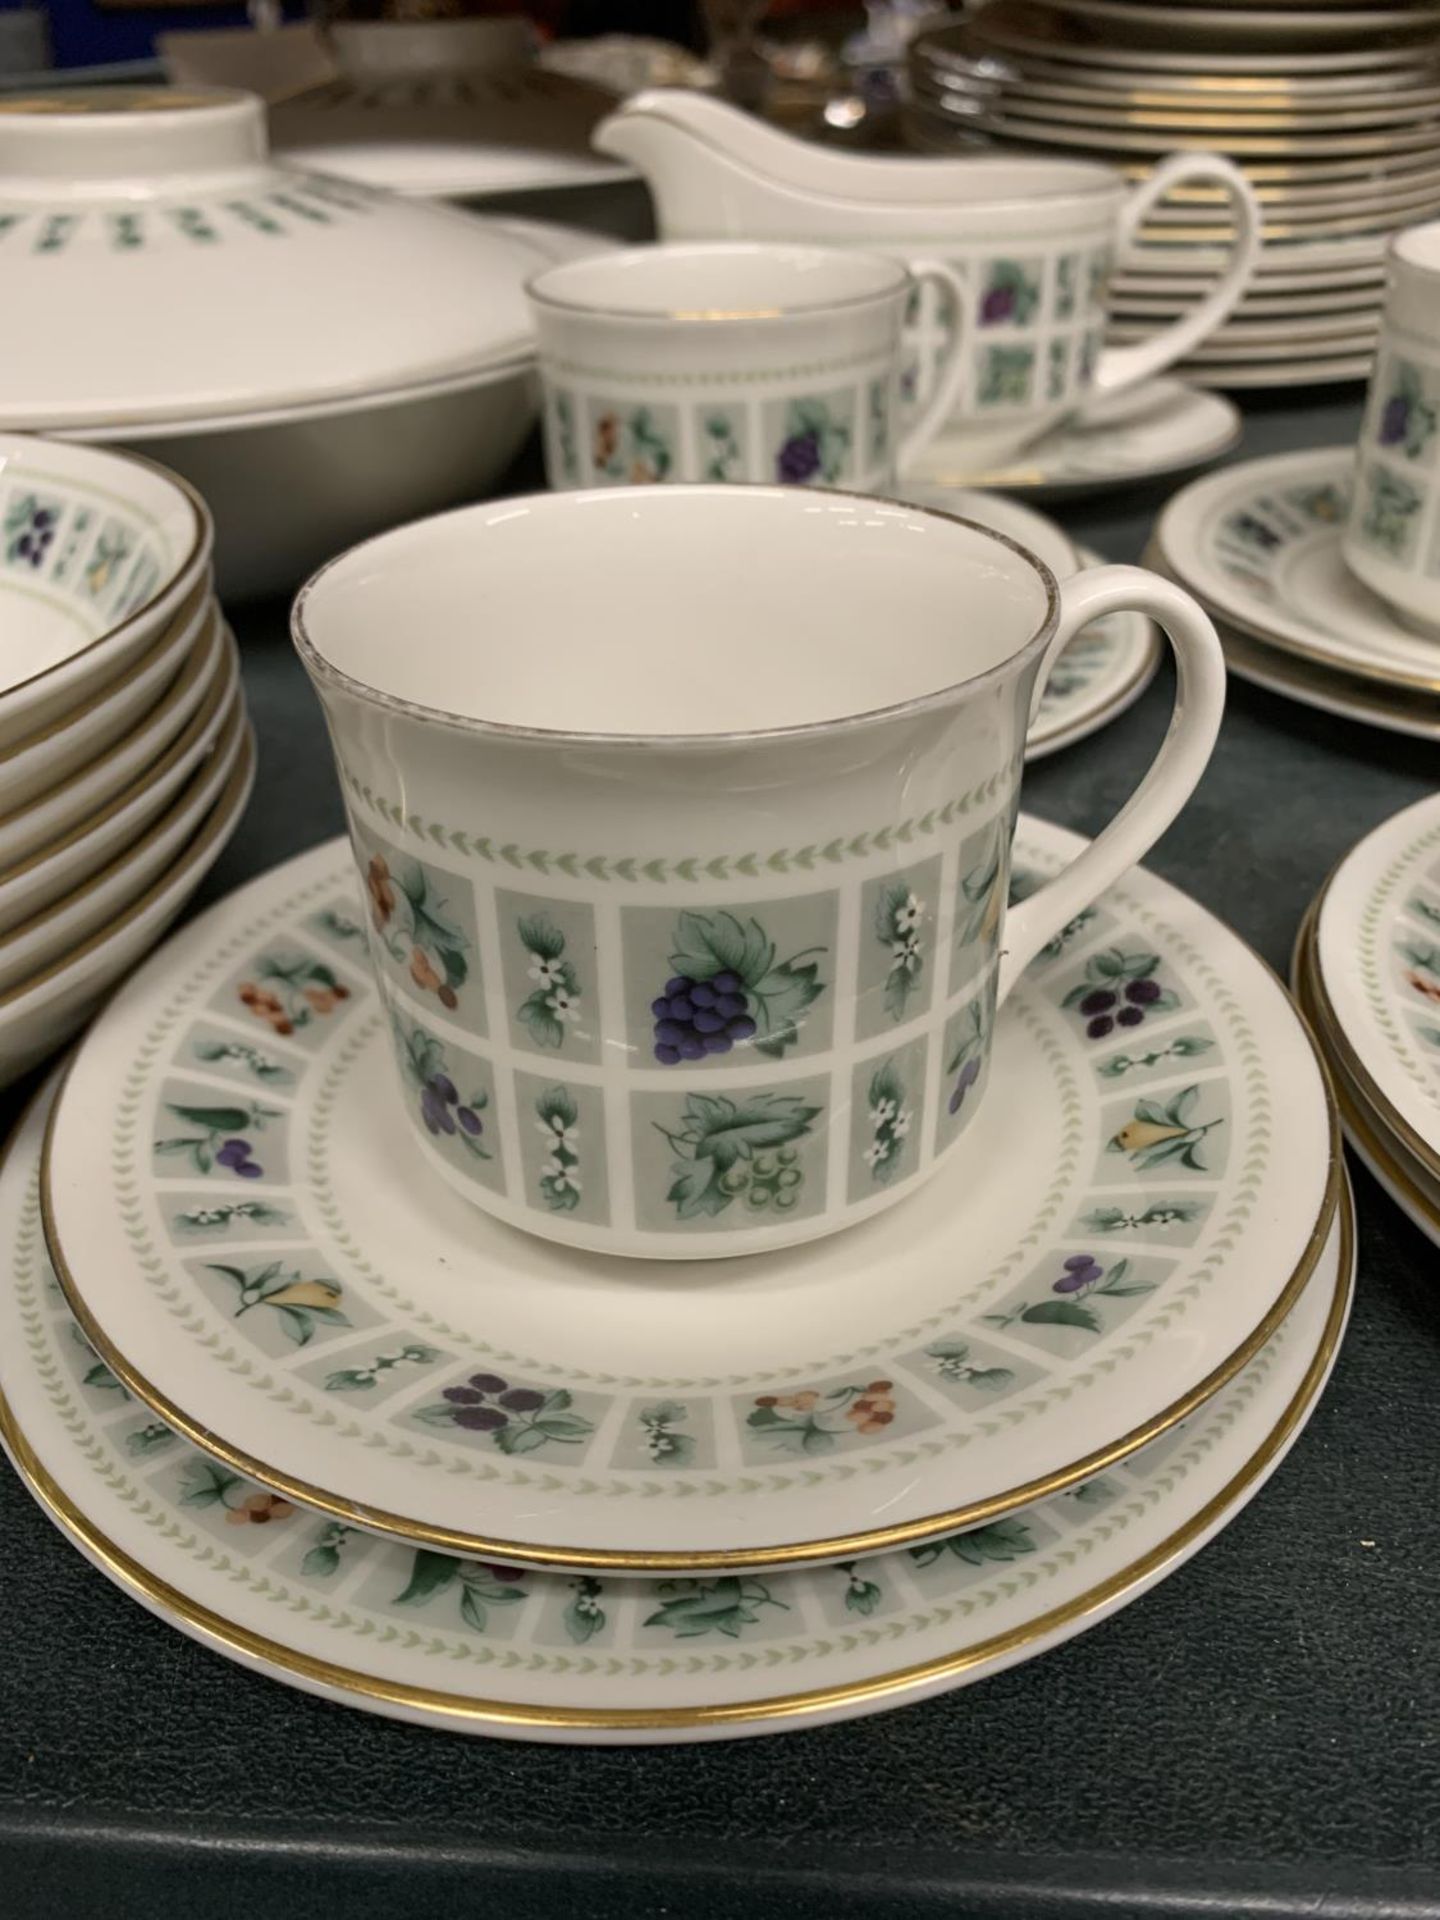 A ROYAL DOULTON 'TAPESTRY' DINNER SERVICE TO INCLUDE DINNER PLATES, SERVING TUREENS, BOWLS, CUPS, - Image 2 of 4